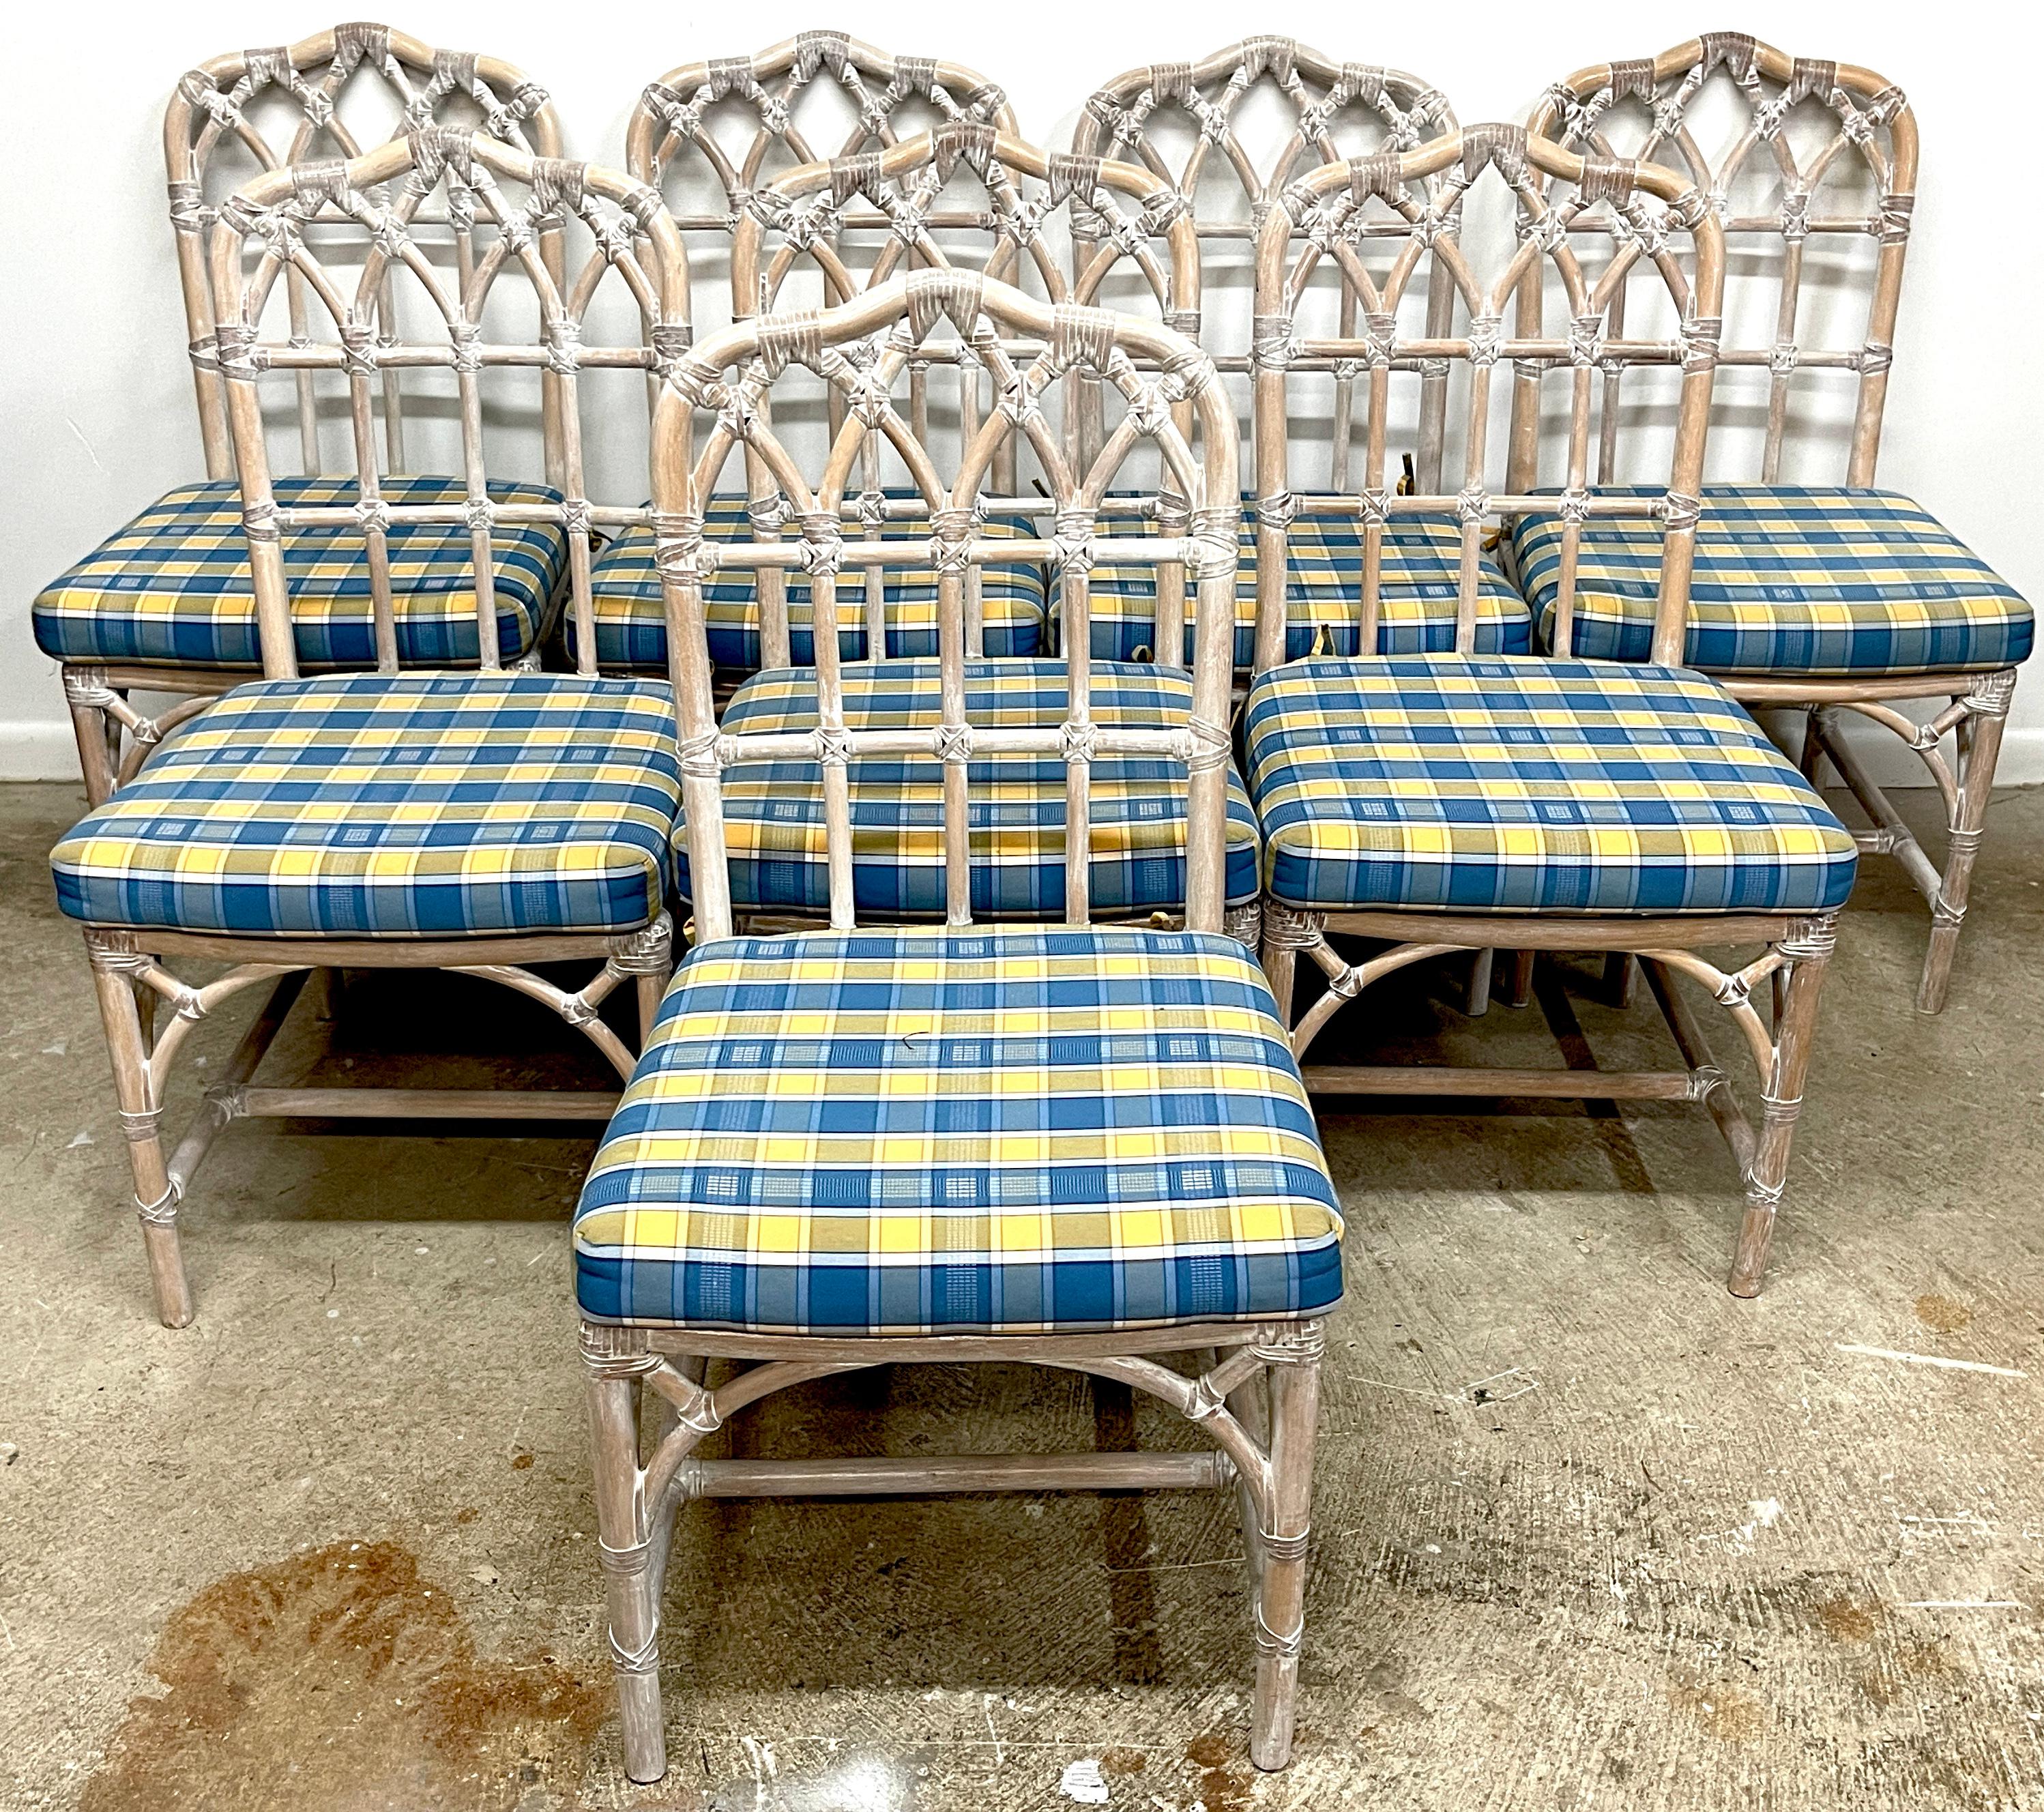 Set of 8 McGuire Bleached Rattan Chinoiserie 'Pagoda'  Dining Chairs 

A beautiful set of 8 McGuire Bleached Rattan Chinoiserie 'Pagoda' Dining Chairs, each embodying timeless elegance and exquisite craftsmanship. Standing 39 inches tall, 20 inches